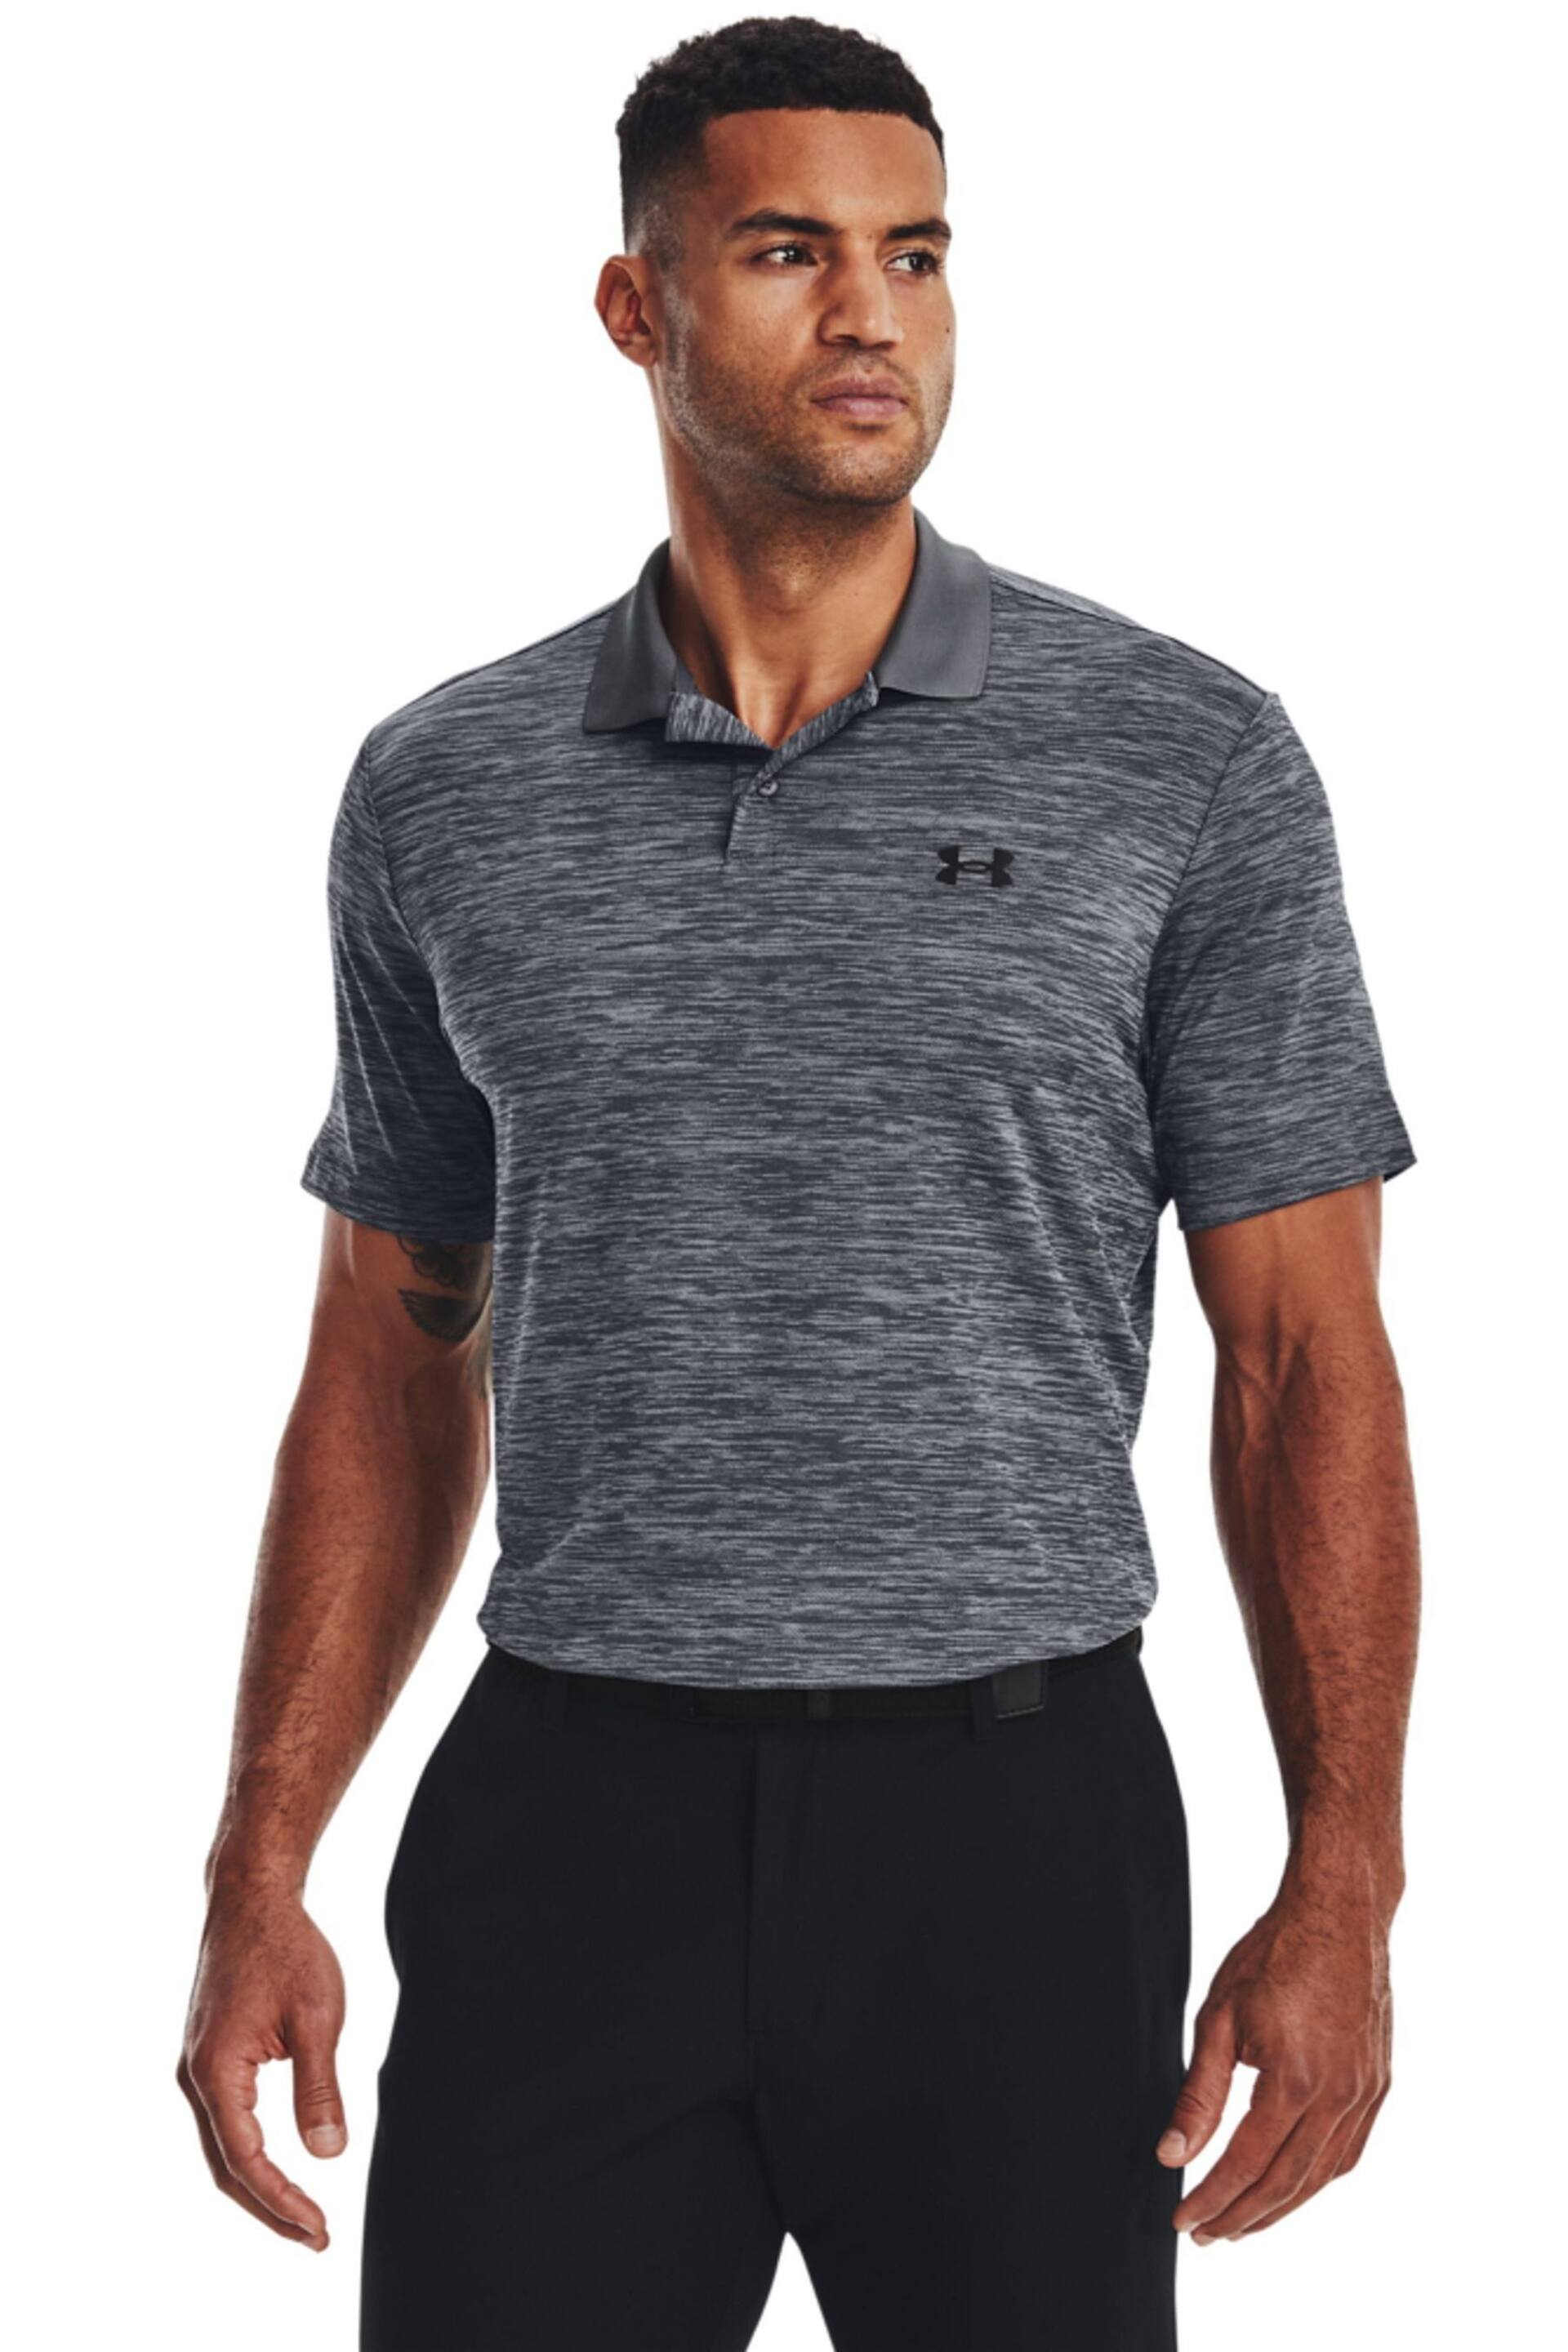 Under Armour Grey/Black Golf Performance Polo Shirt - Image 2 of 6